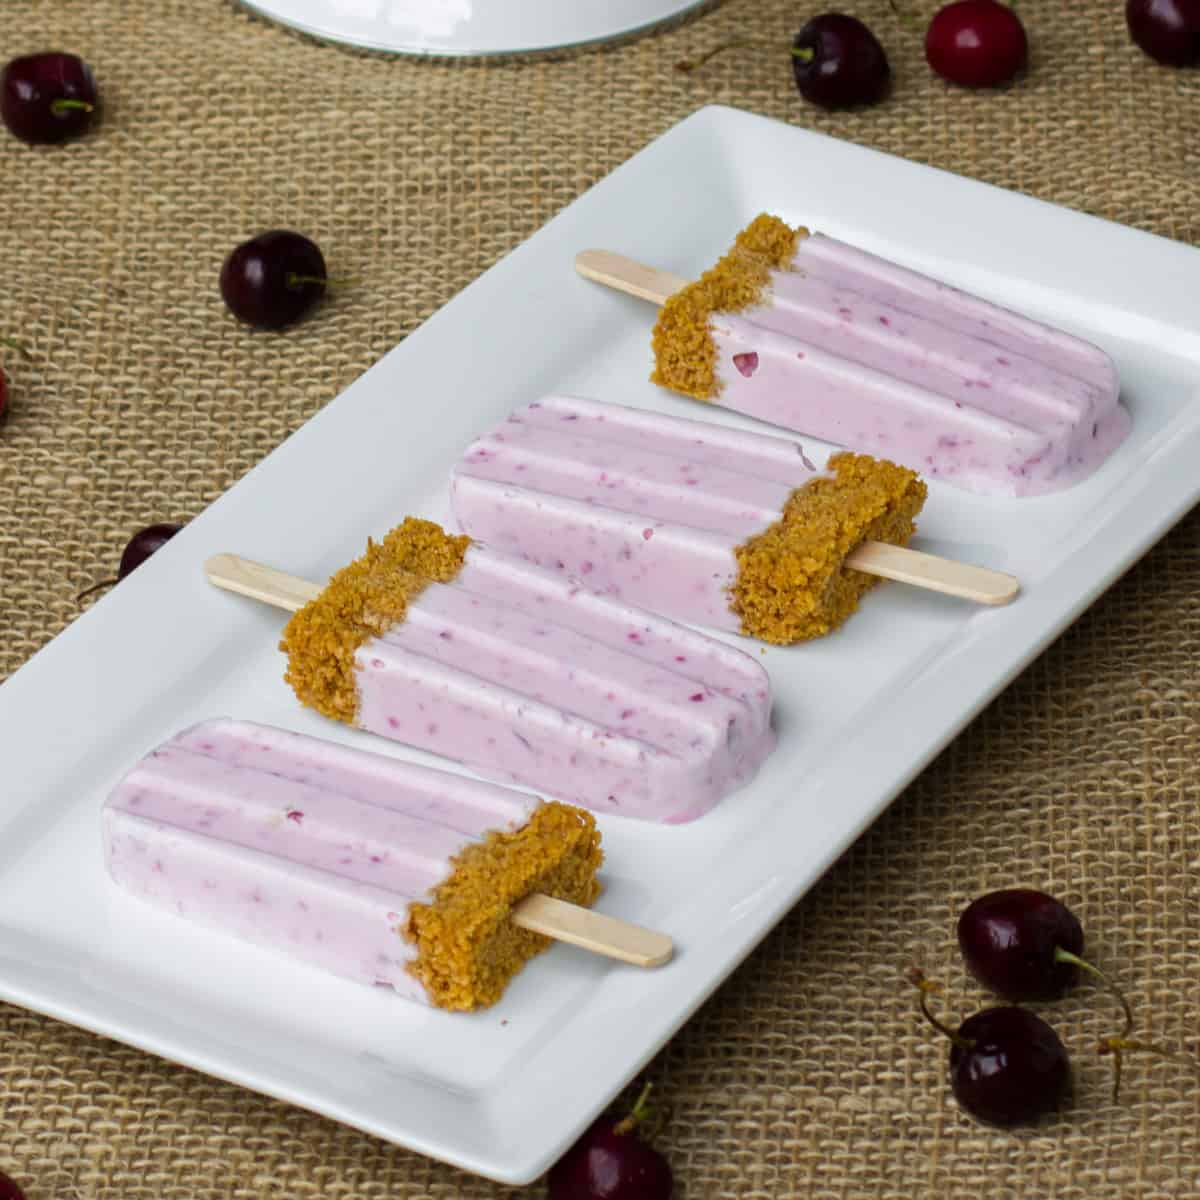 Four popsicles on a white plate.